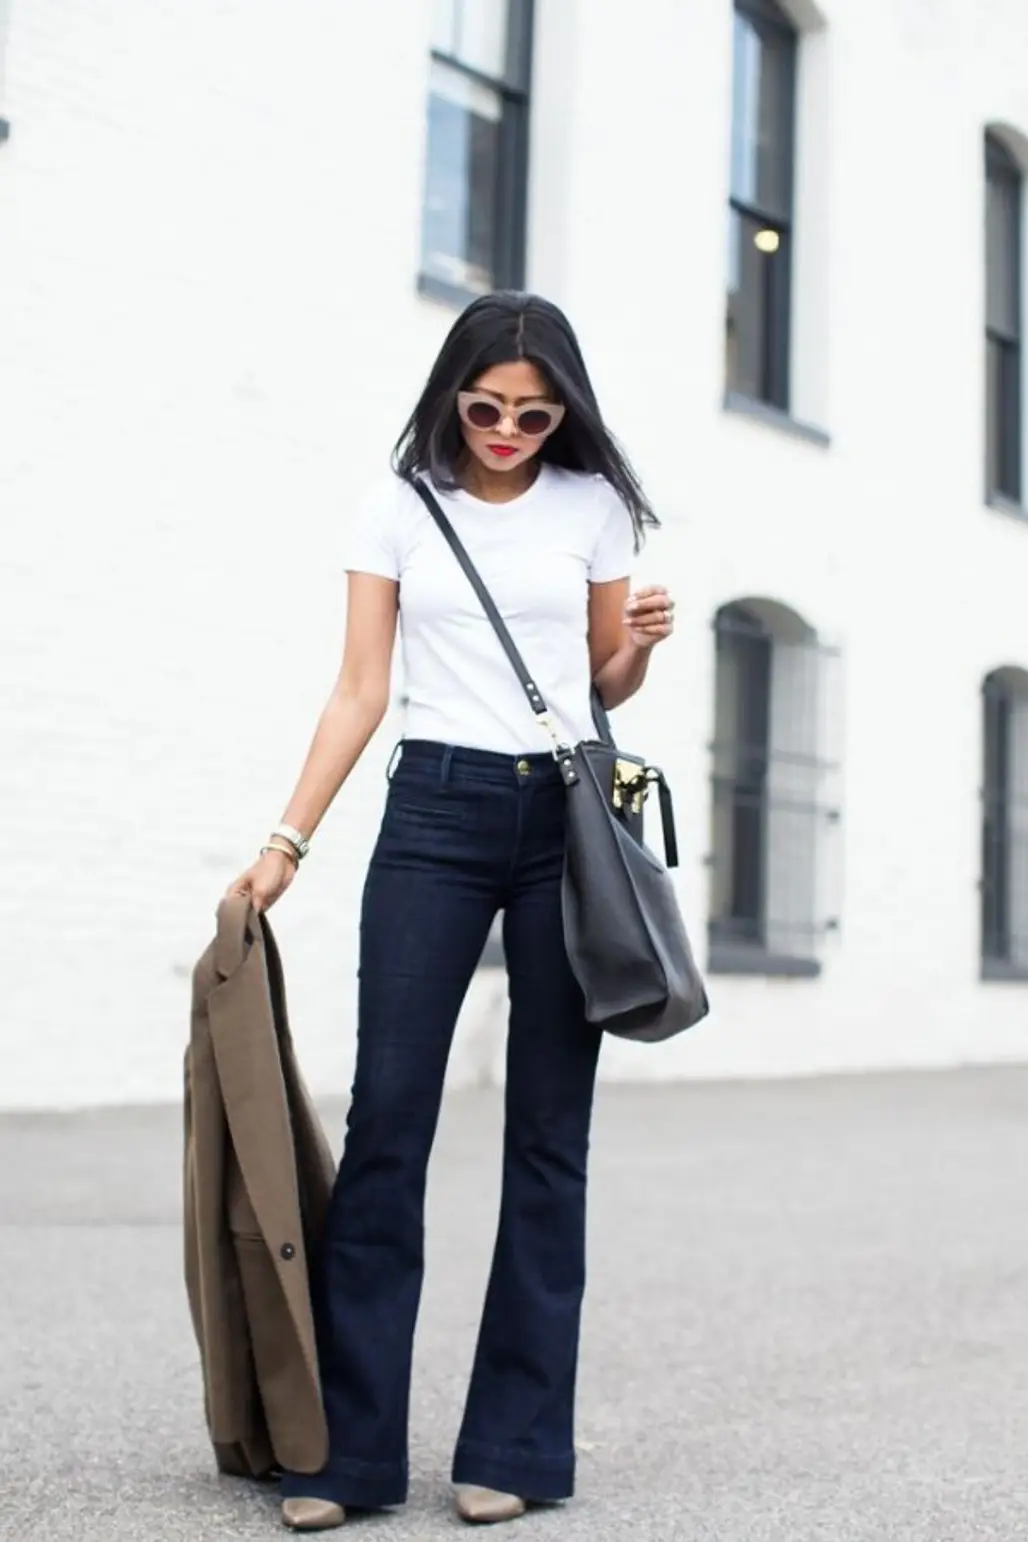 Keep It Simple with Dark Denim Flares and a White Tee